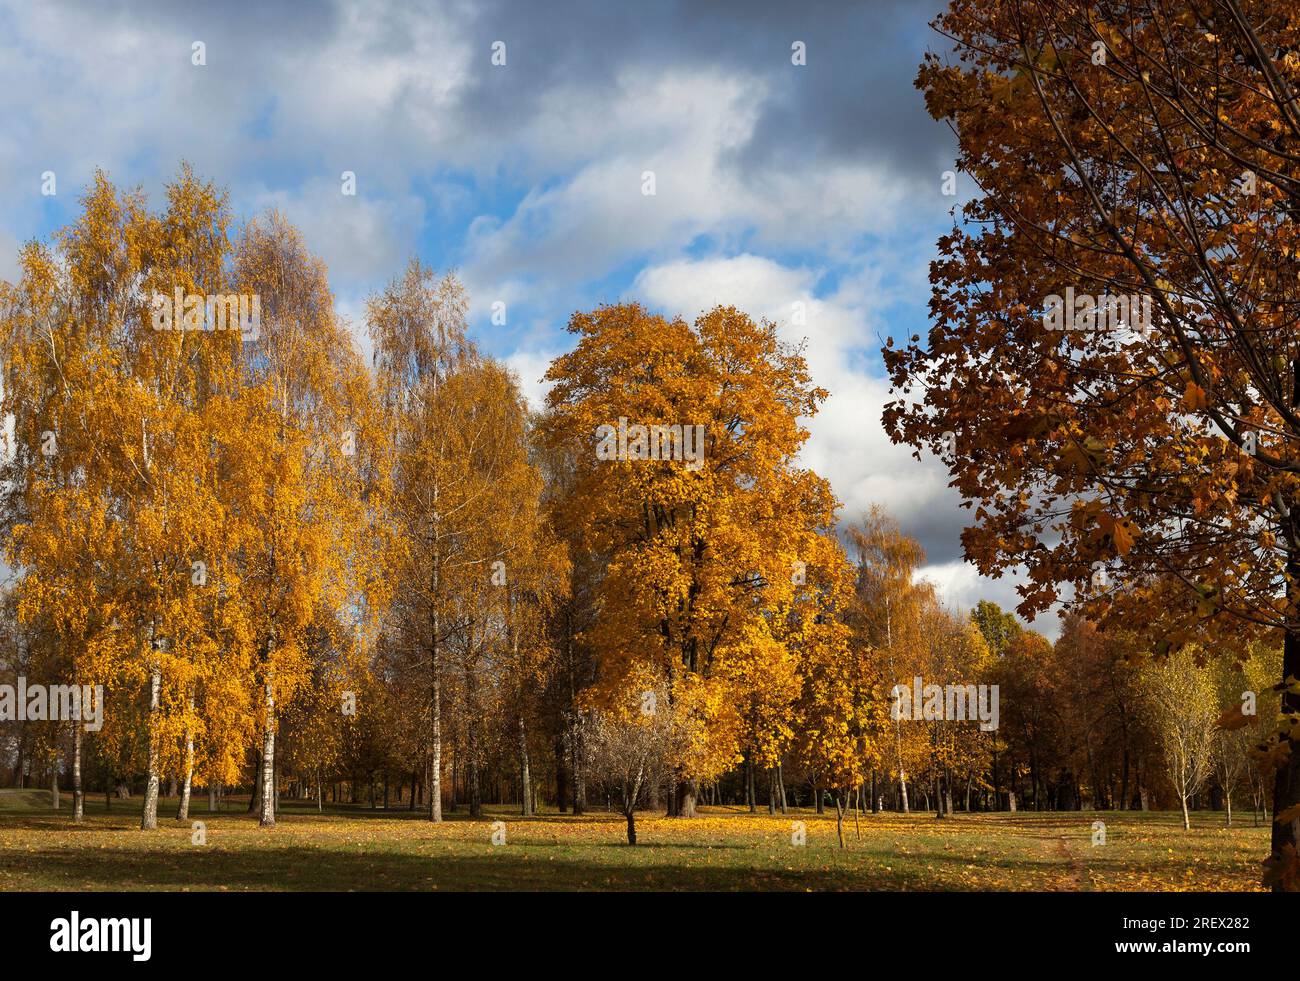 autumn nature with multi colored trees that change the color of the foliage with seasonal changes Stock Photo